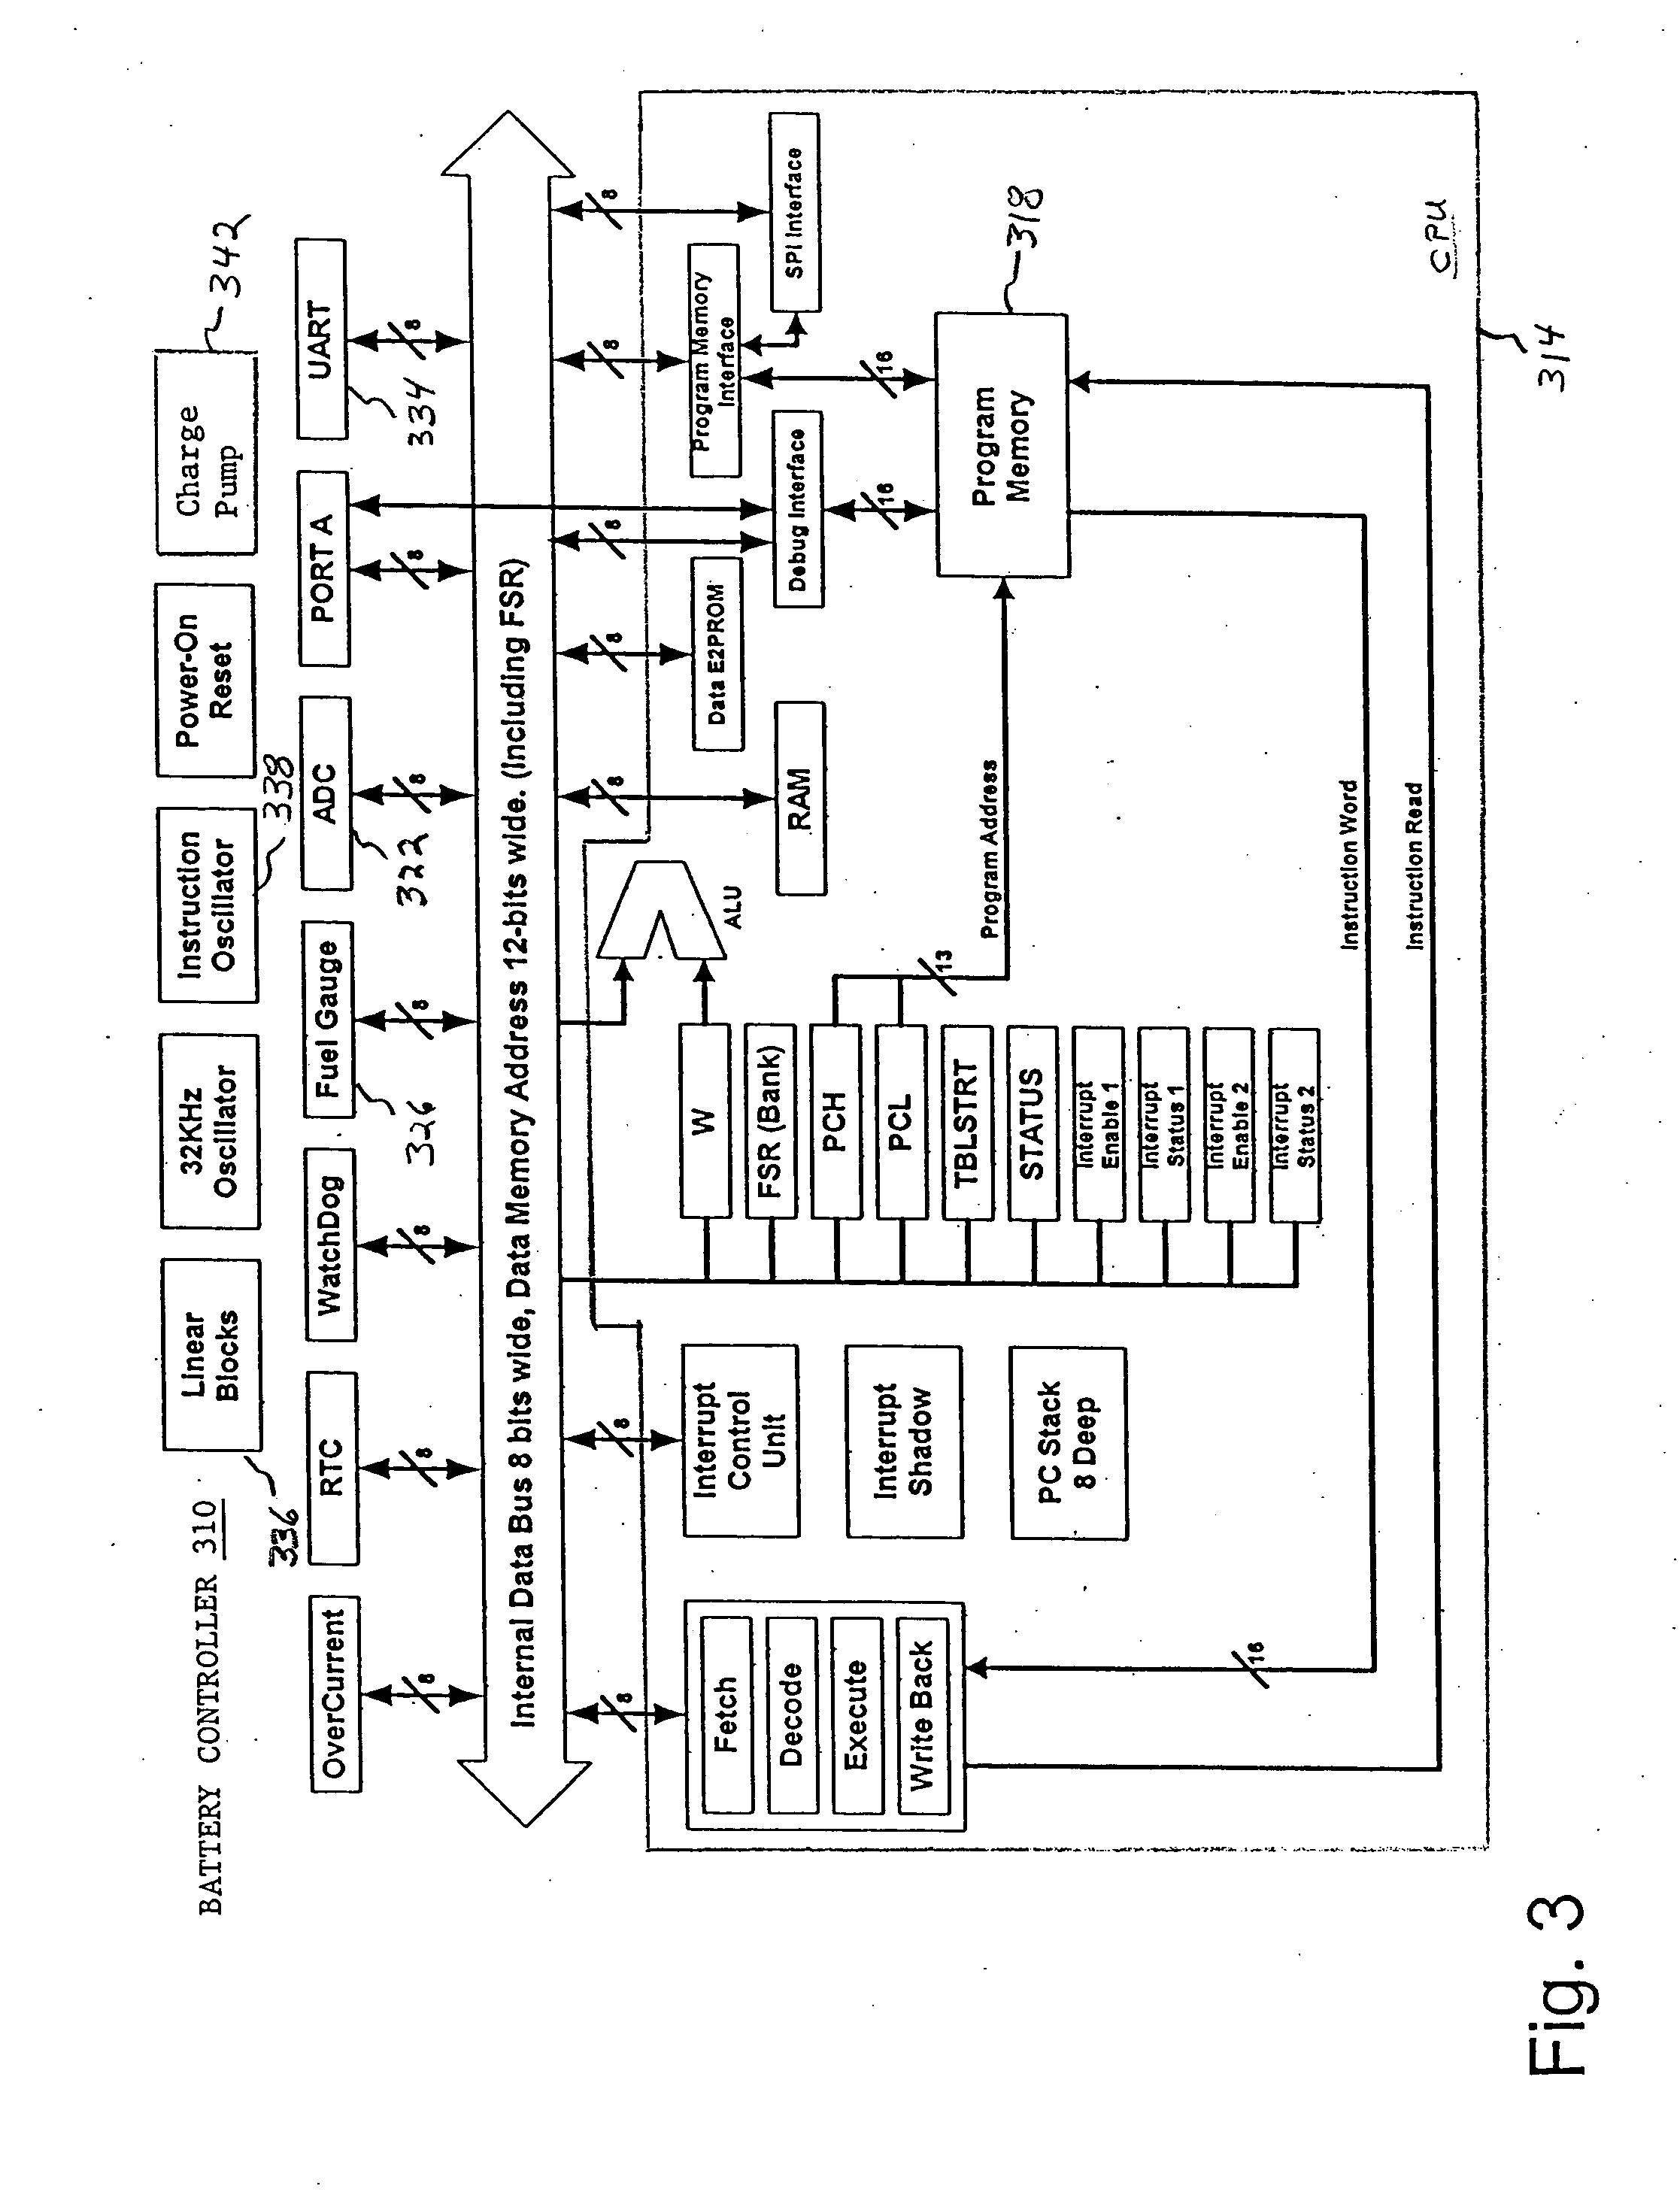 System and method for efficiently implementing a battery controller for an electronic device